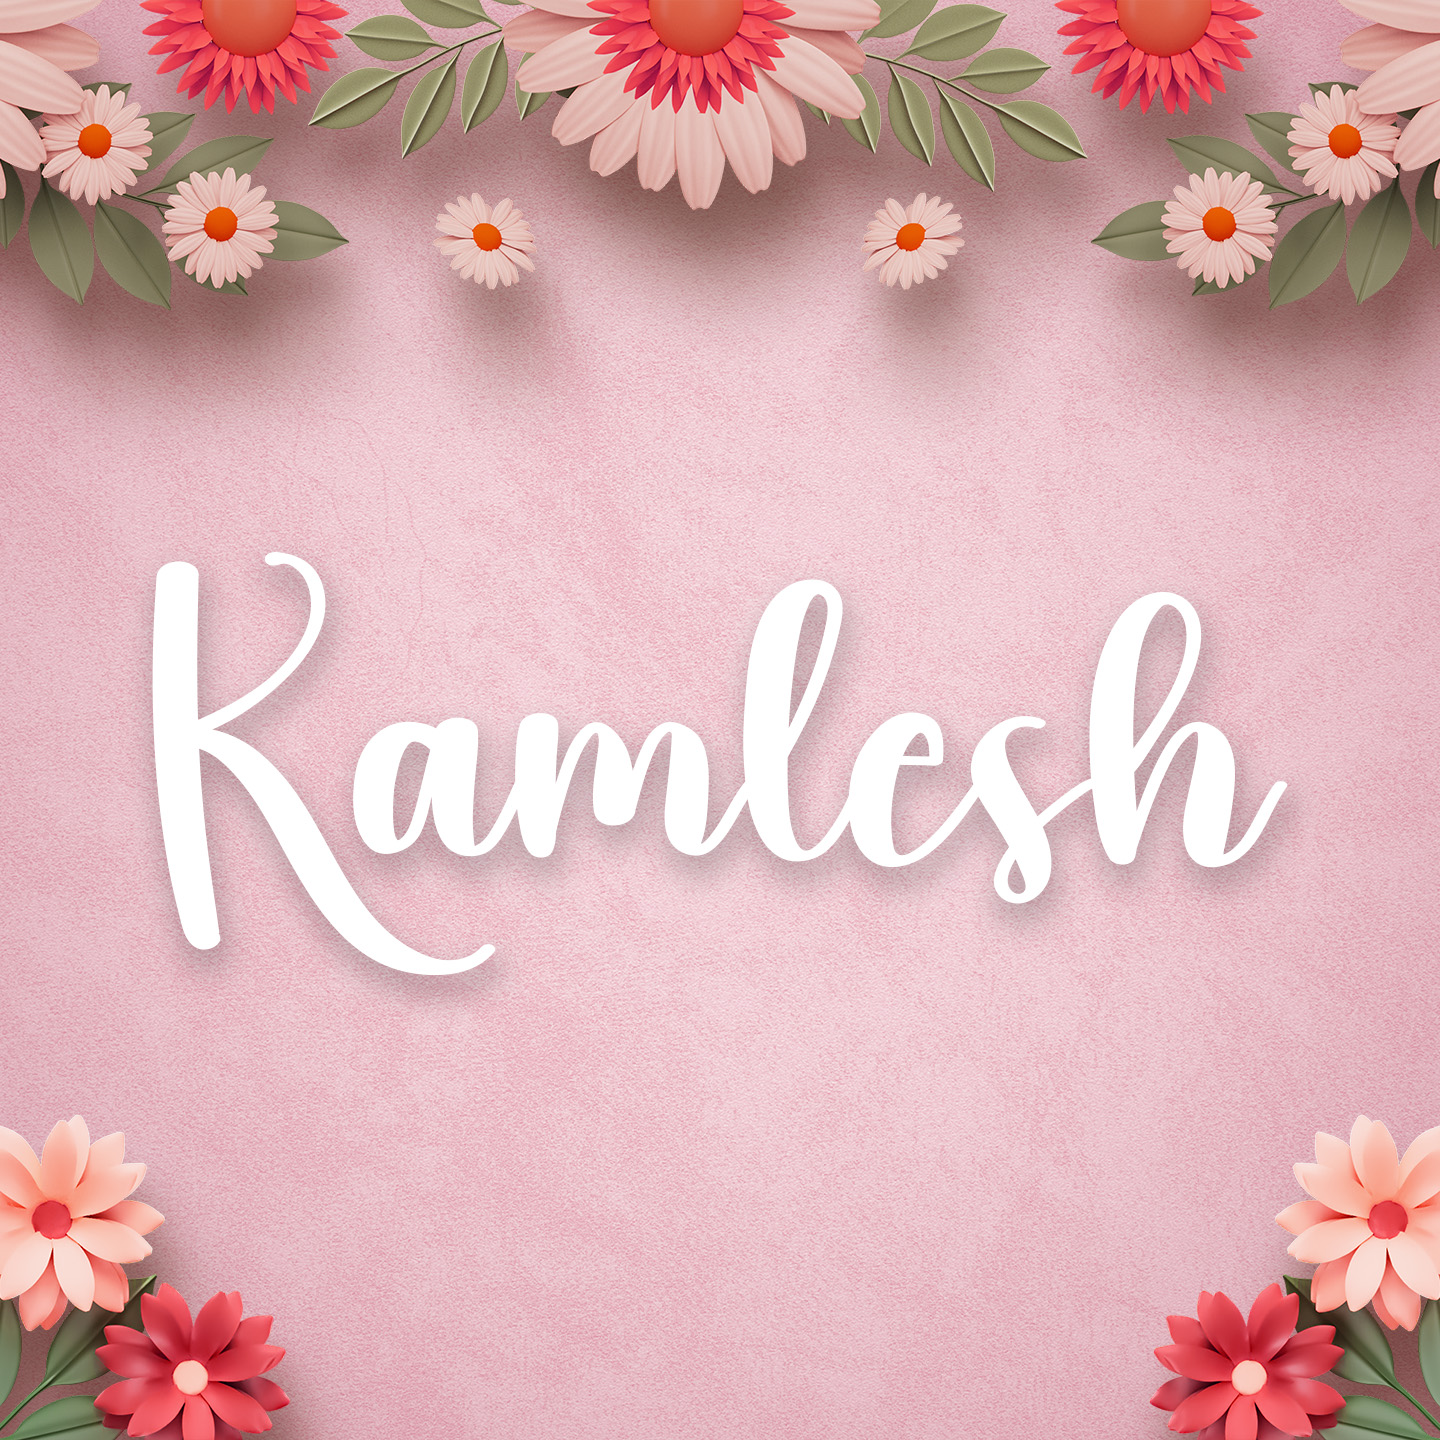 FingerTips - Your Name in Cool Signature - #kamlesh #fingertips #fingerart  #artwork #download #app #iphone #android #keepsupporting #likeus | Facebook